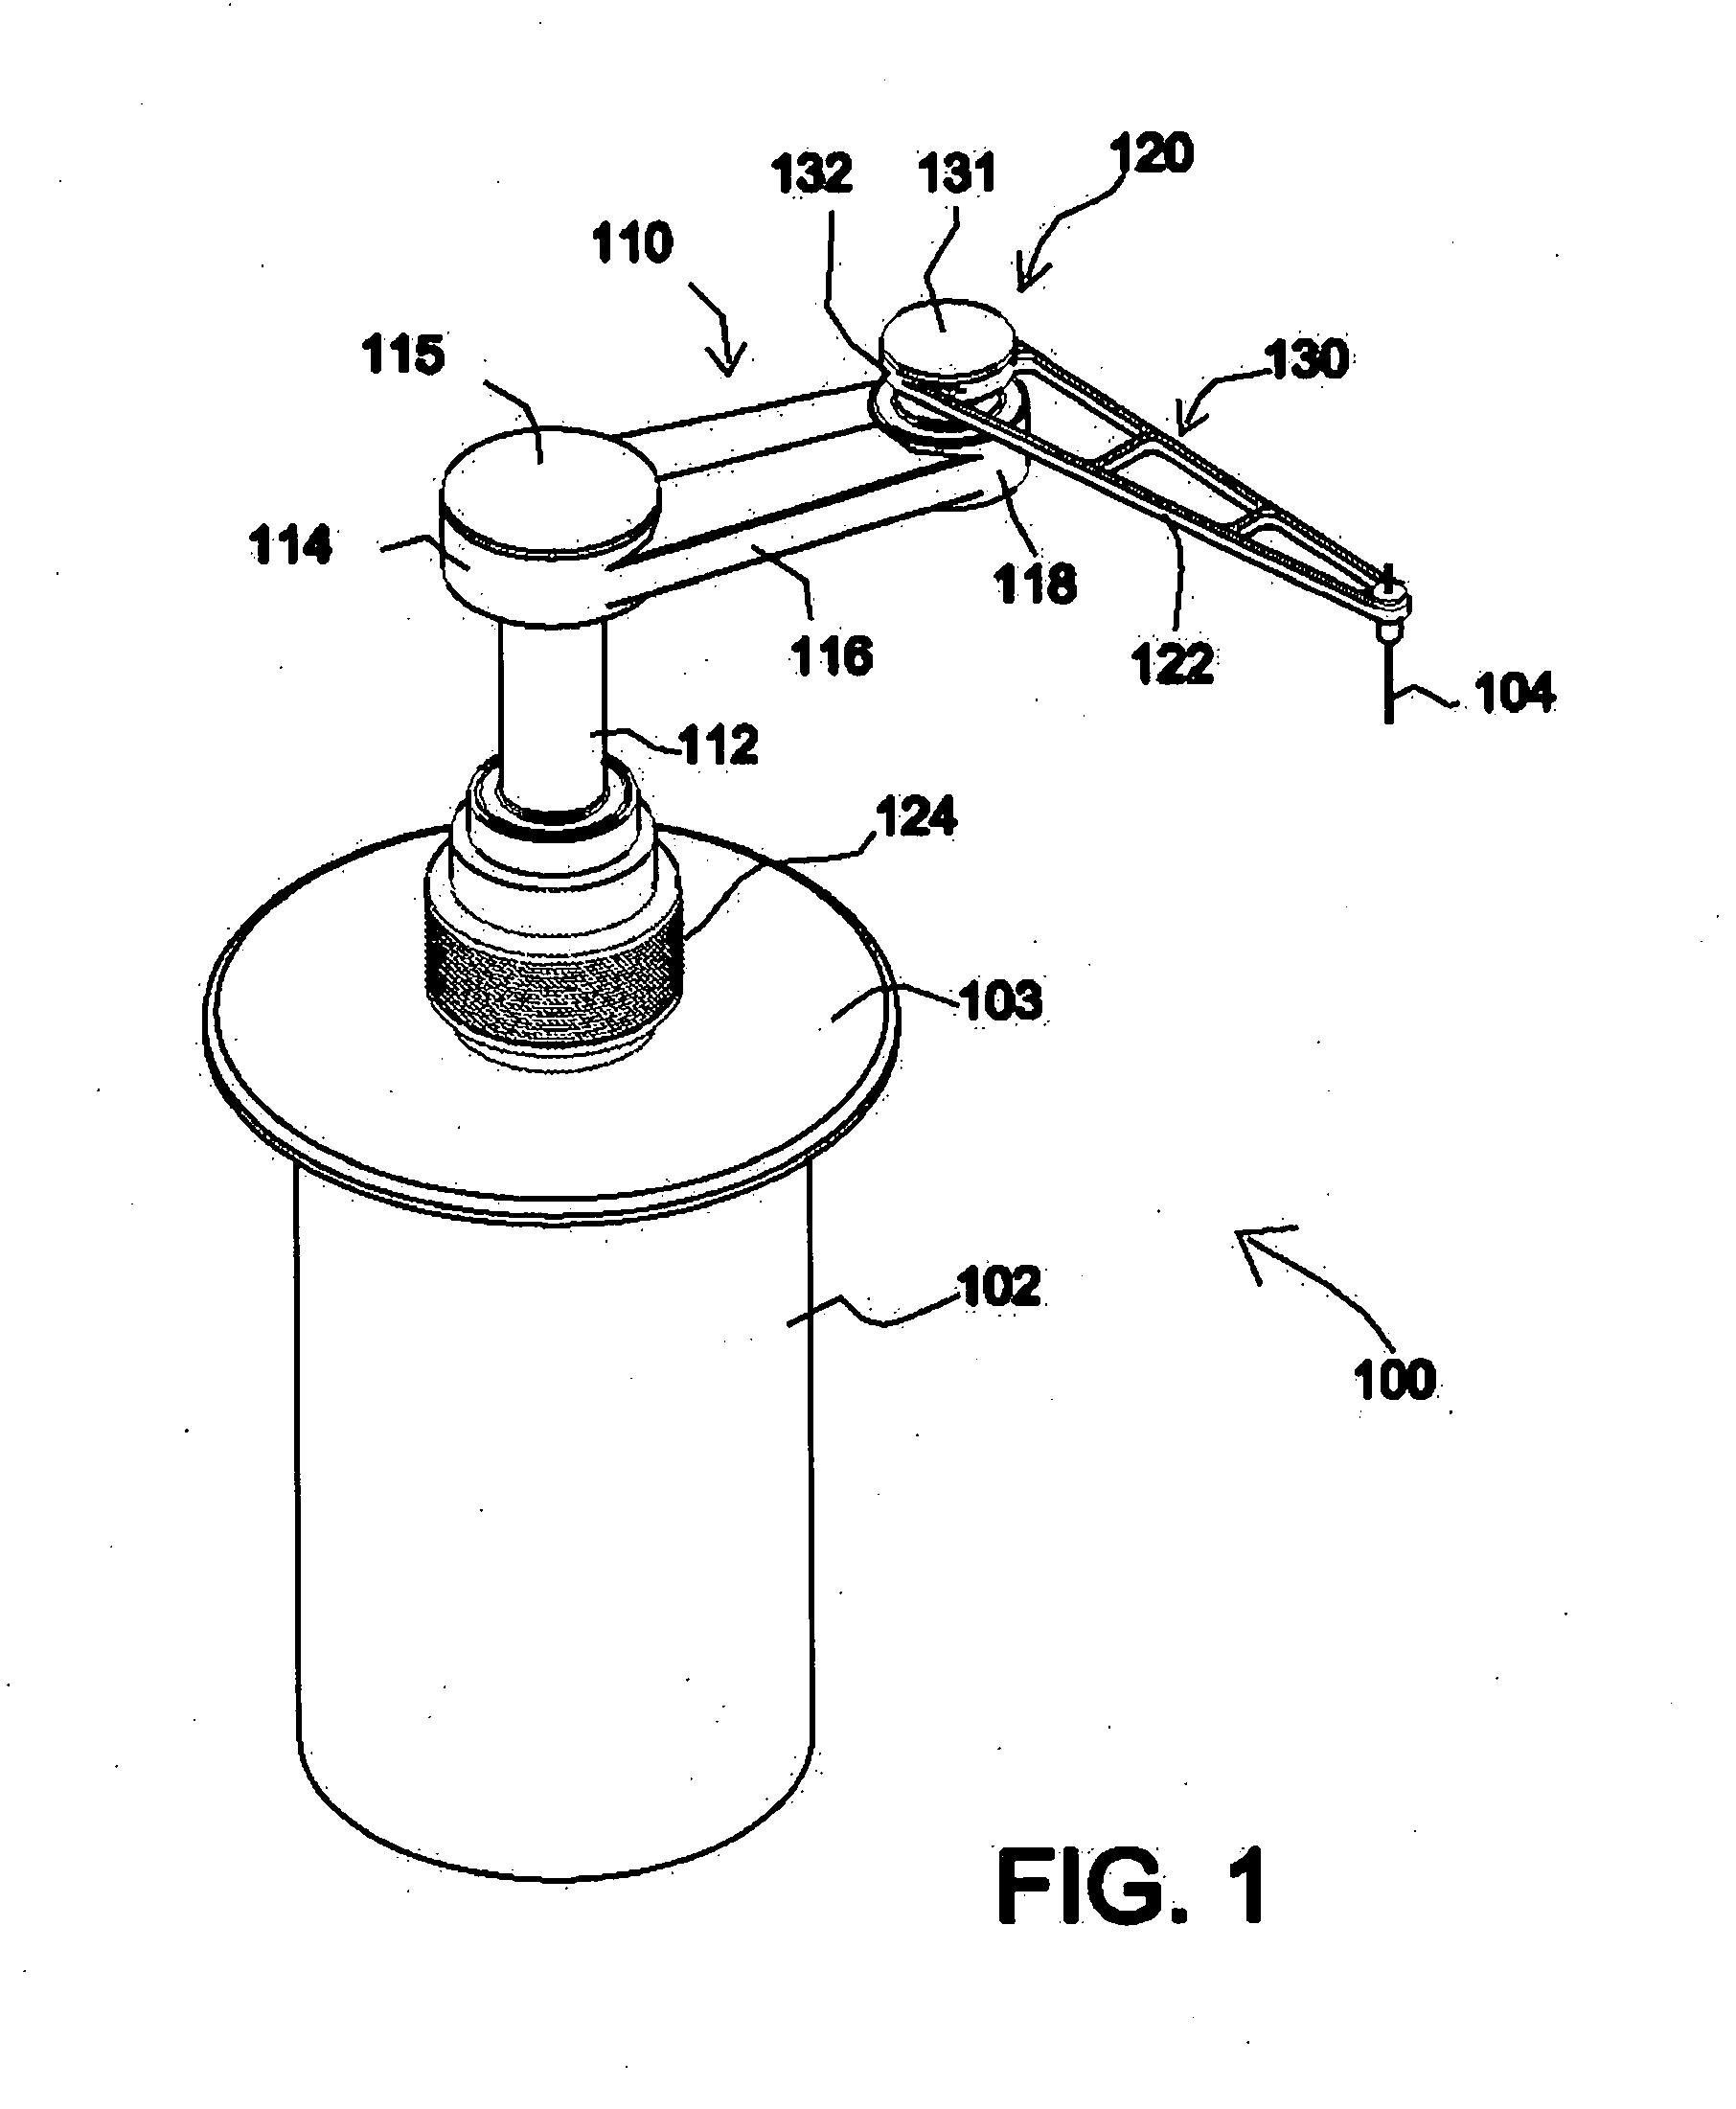 Articulated arm apparatus and system